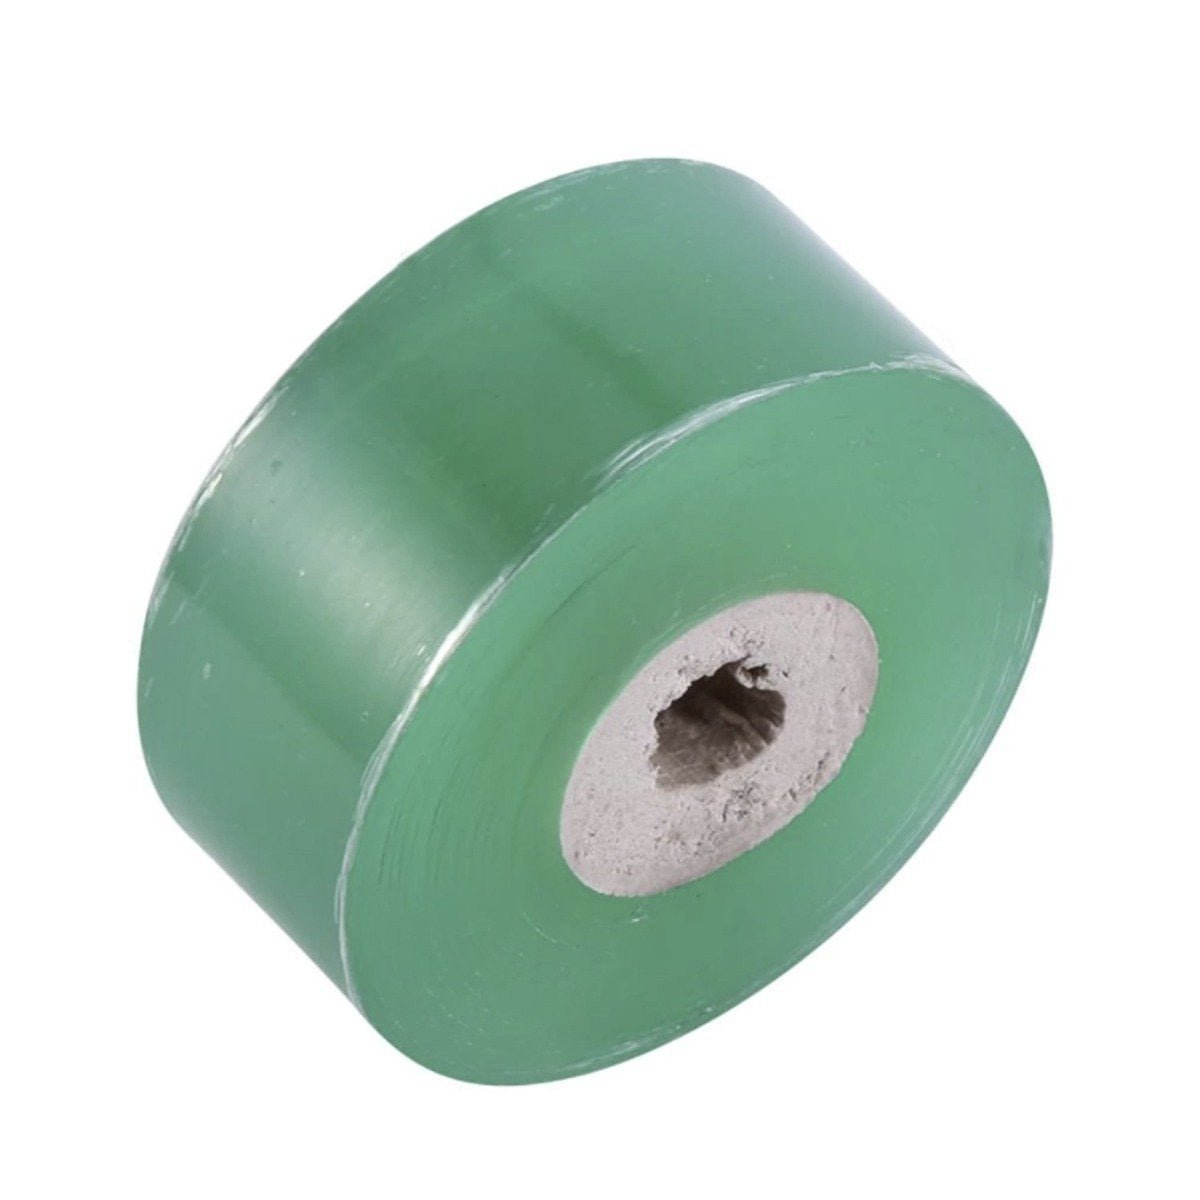 2pcs Plant Budding Pruning Parafilm Tree Tape Roll Repair Barrier Graft Moisture - 2x 30mm - - Asia Sell